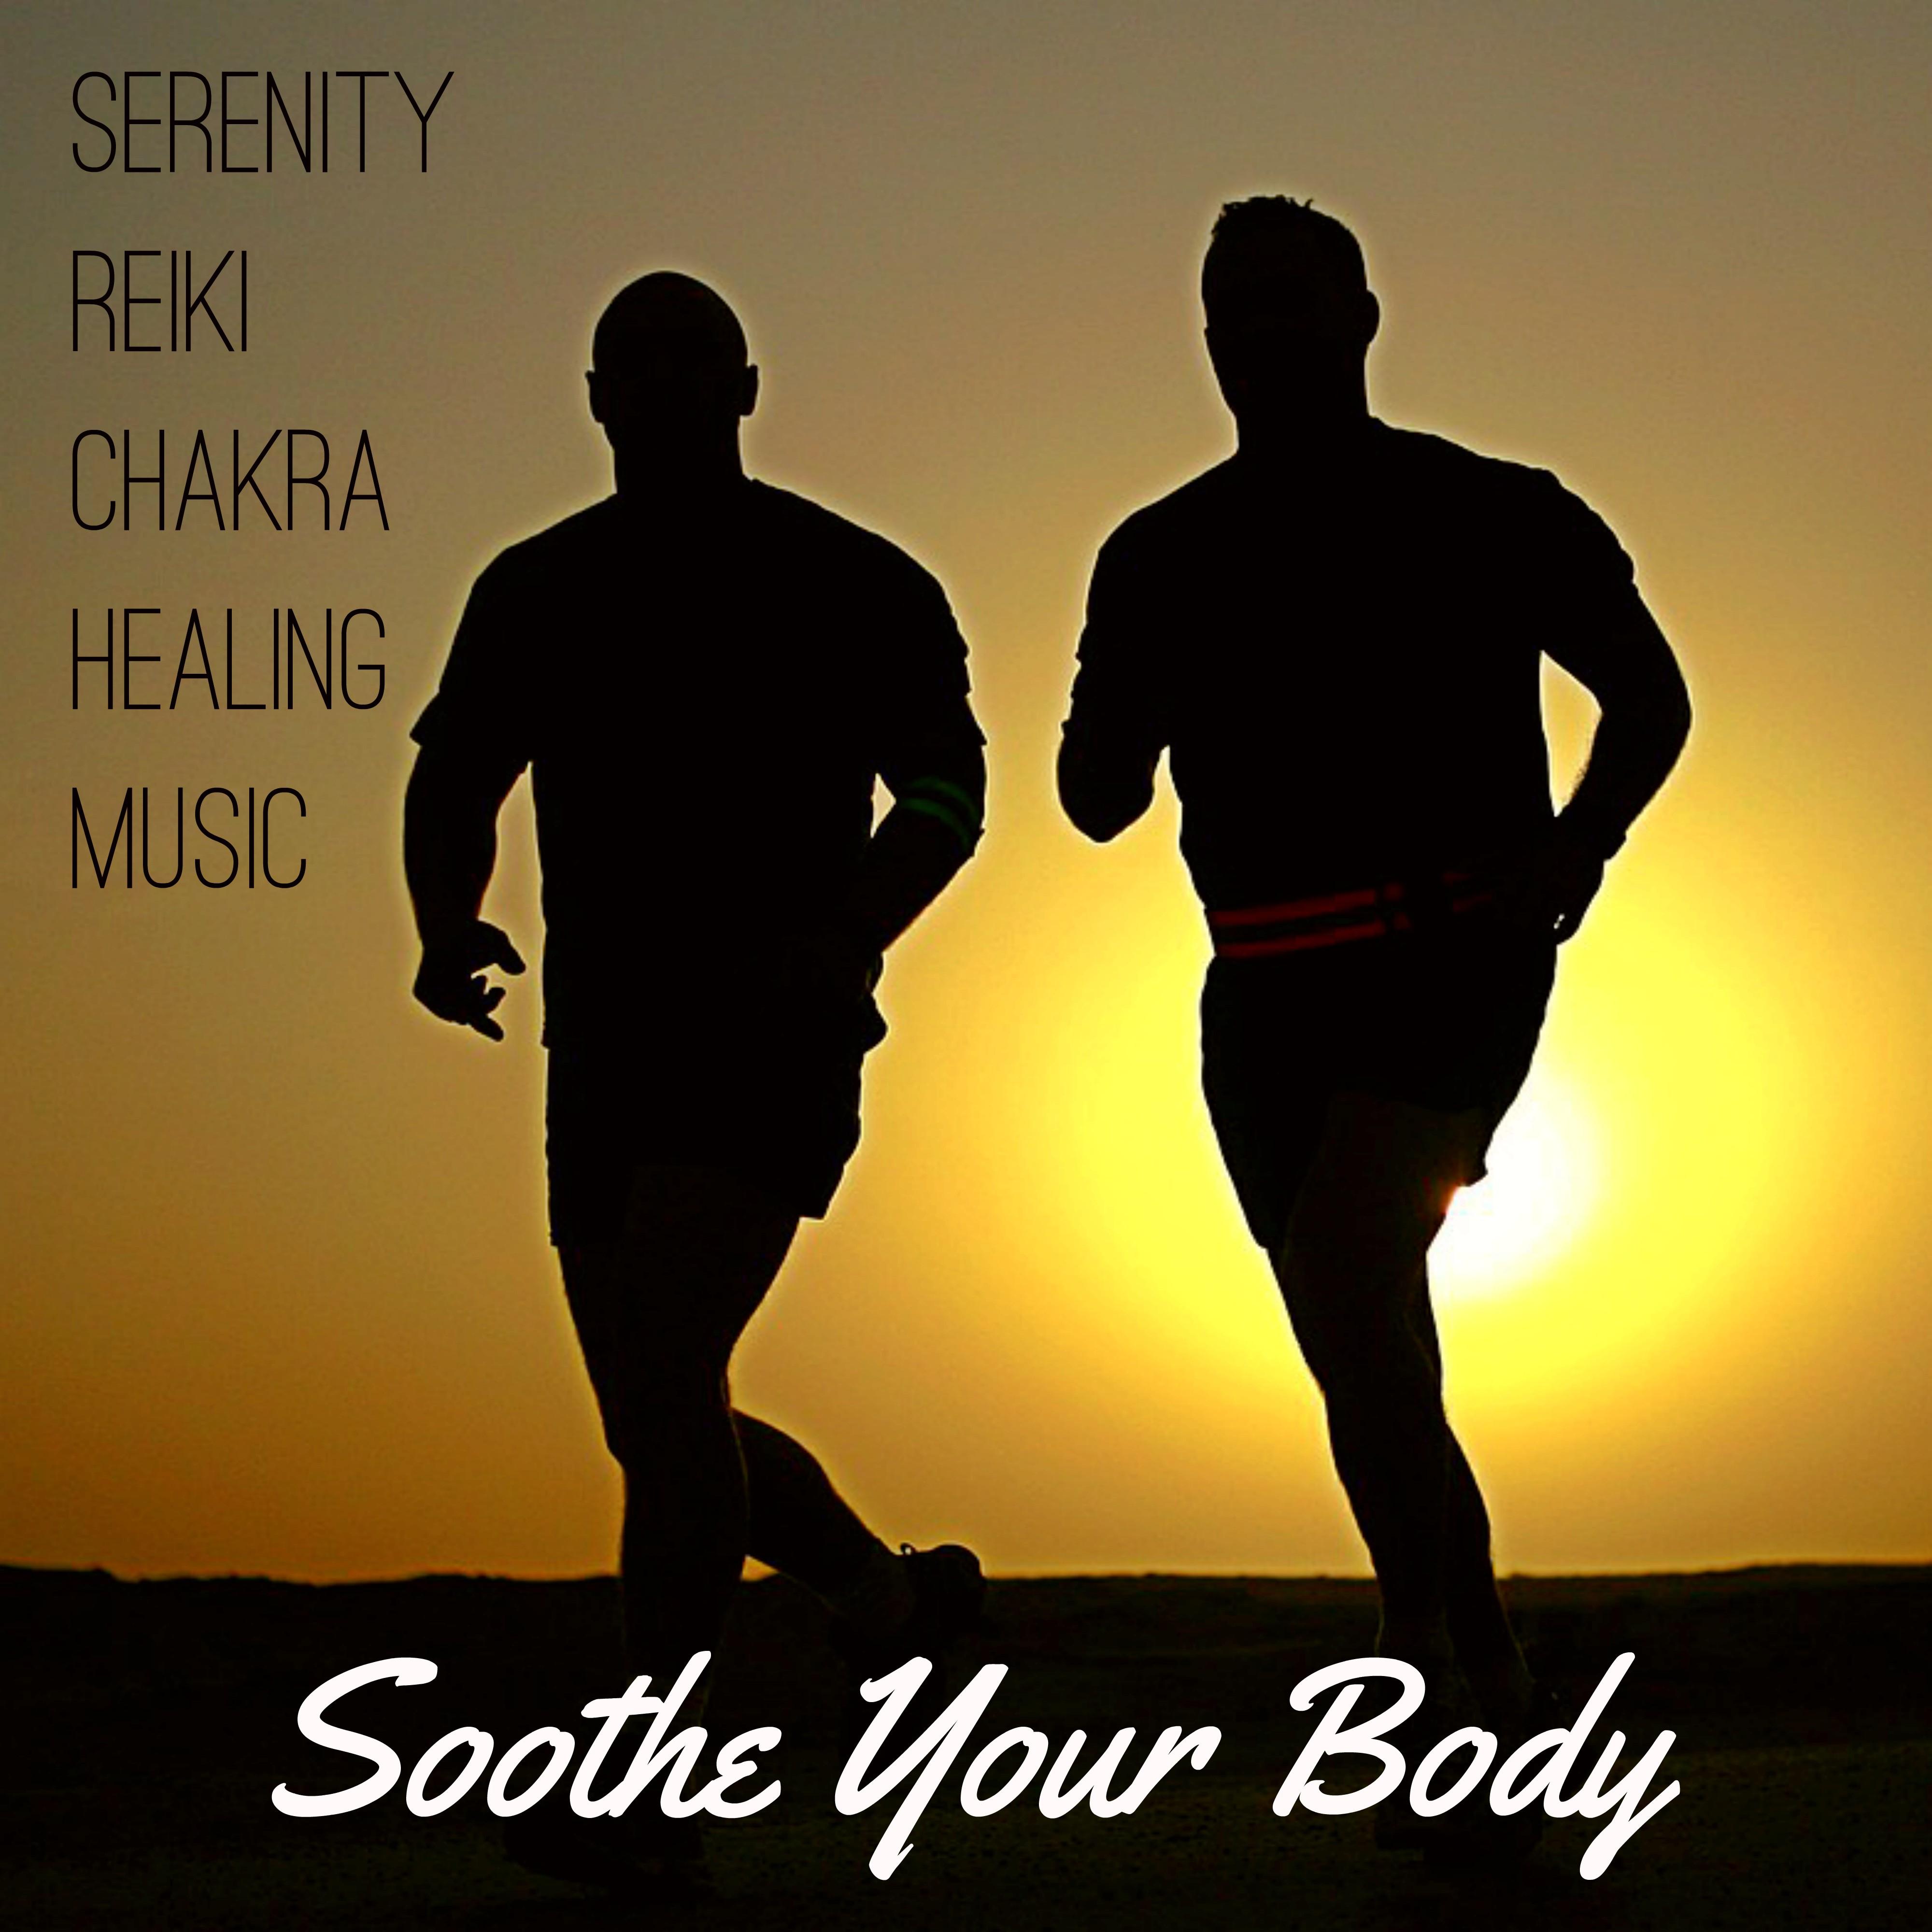 Soothe Your Body